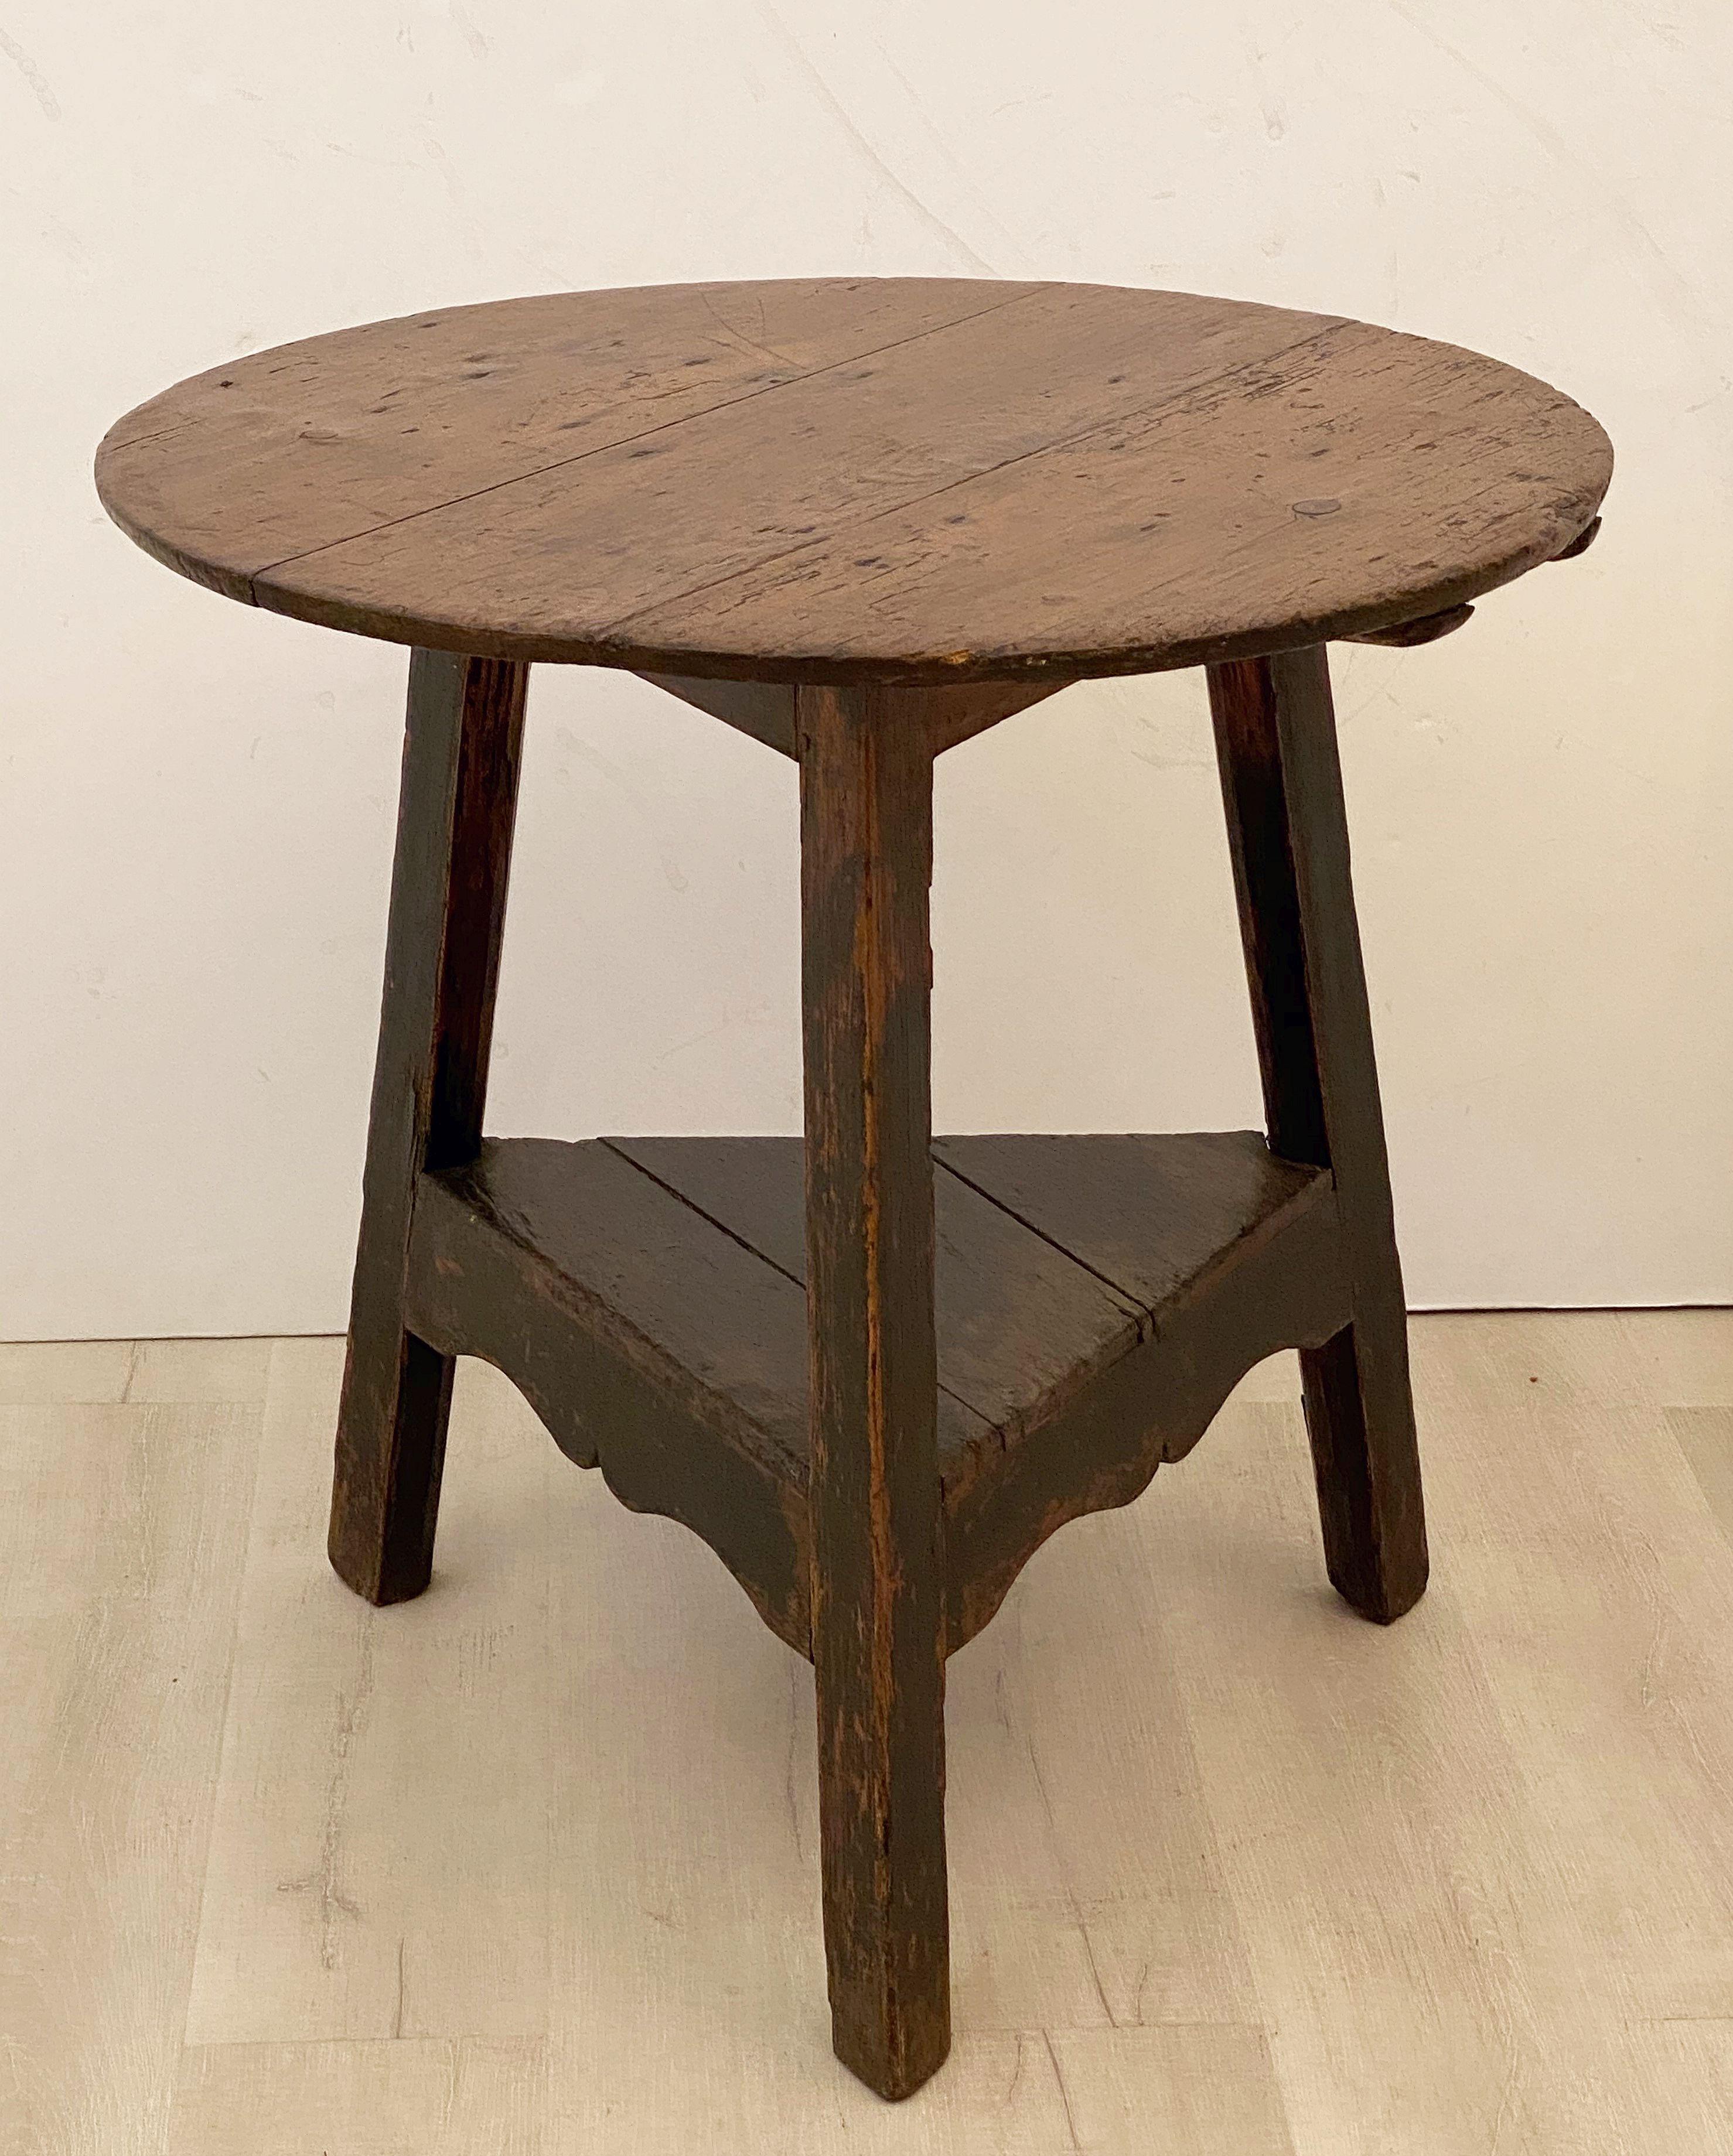 A fine English cricket table of aged pine featuring the traditional round or circular top over a tripod base of painted pine with triangular under-tier shelf.
The under-tier shelf with decorative ogee accents.

Makes a nice occasional table or